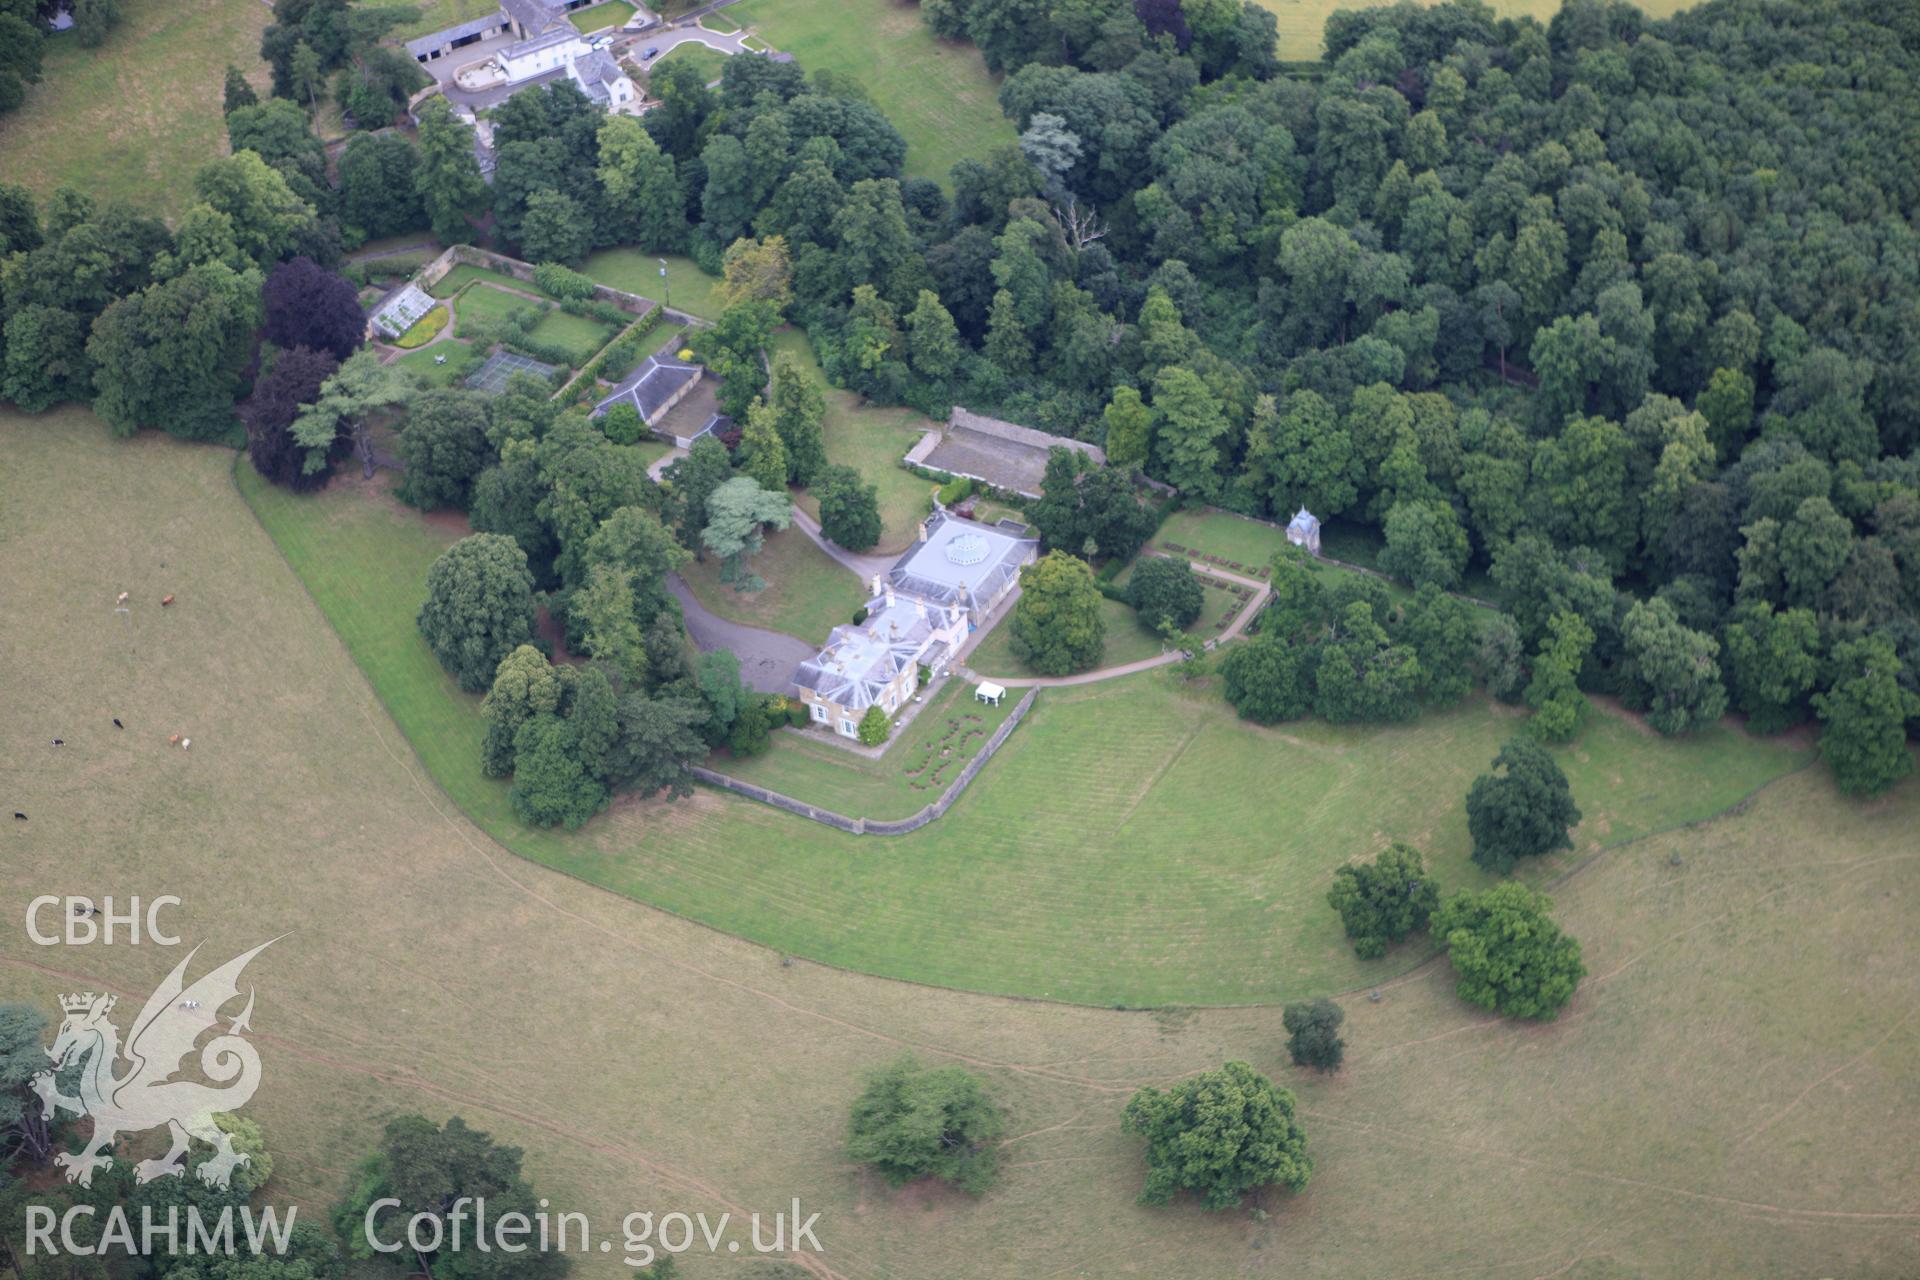 RCAHMW colour oblique aerial photograph of Wyelands House, Mathern, Chepstow. Taken on 09 July 2009 by Toby Driver